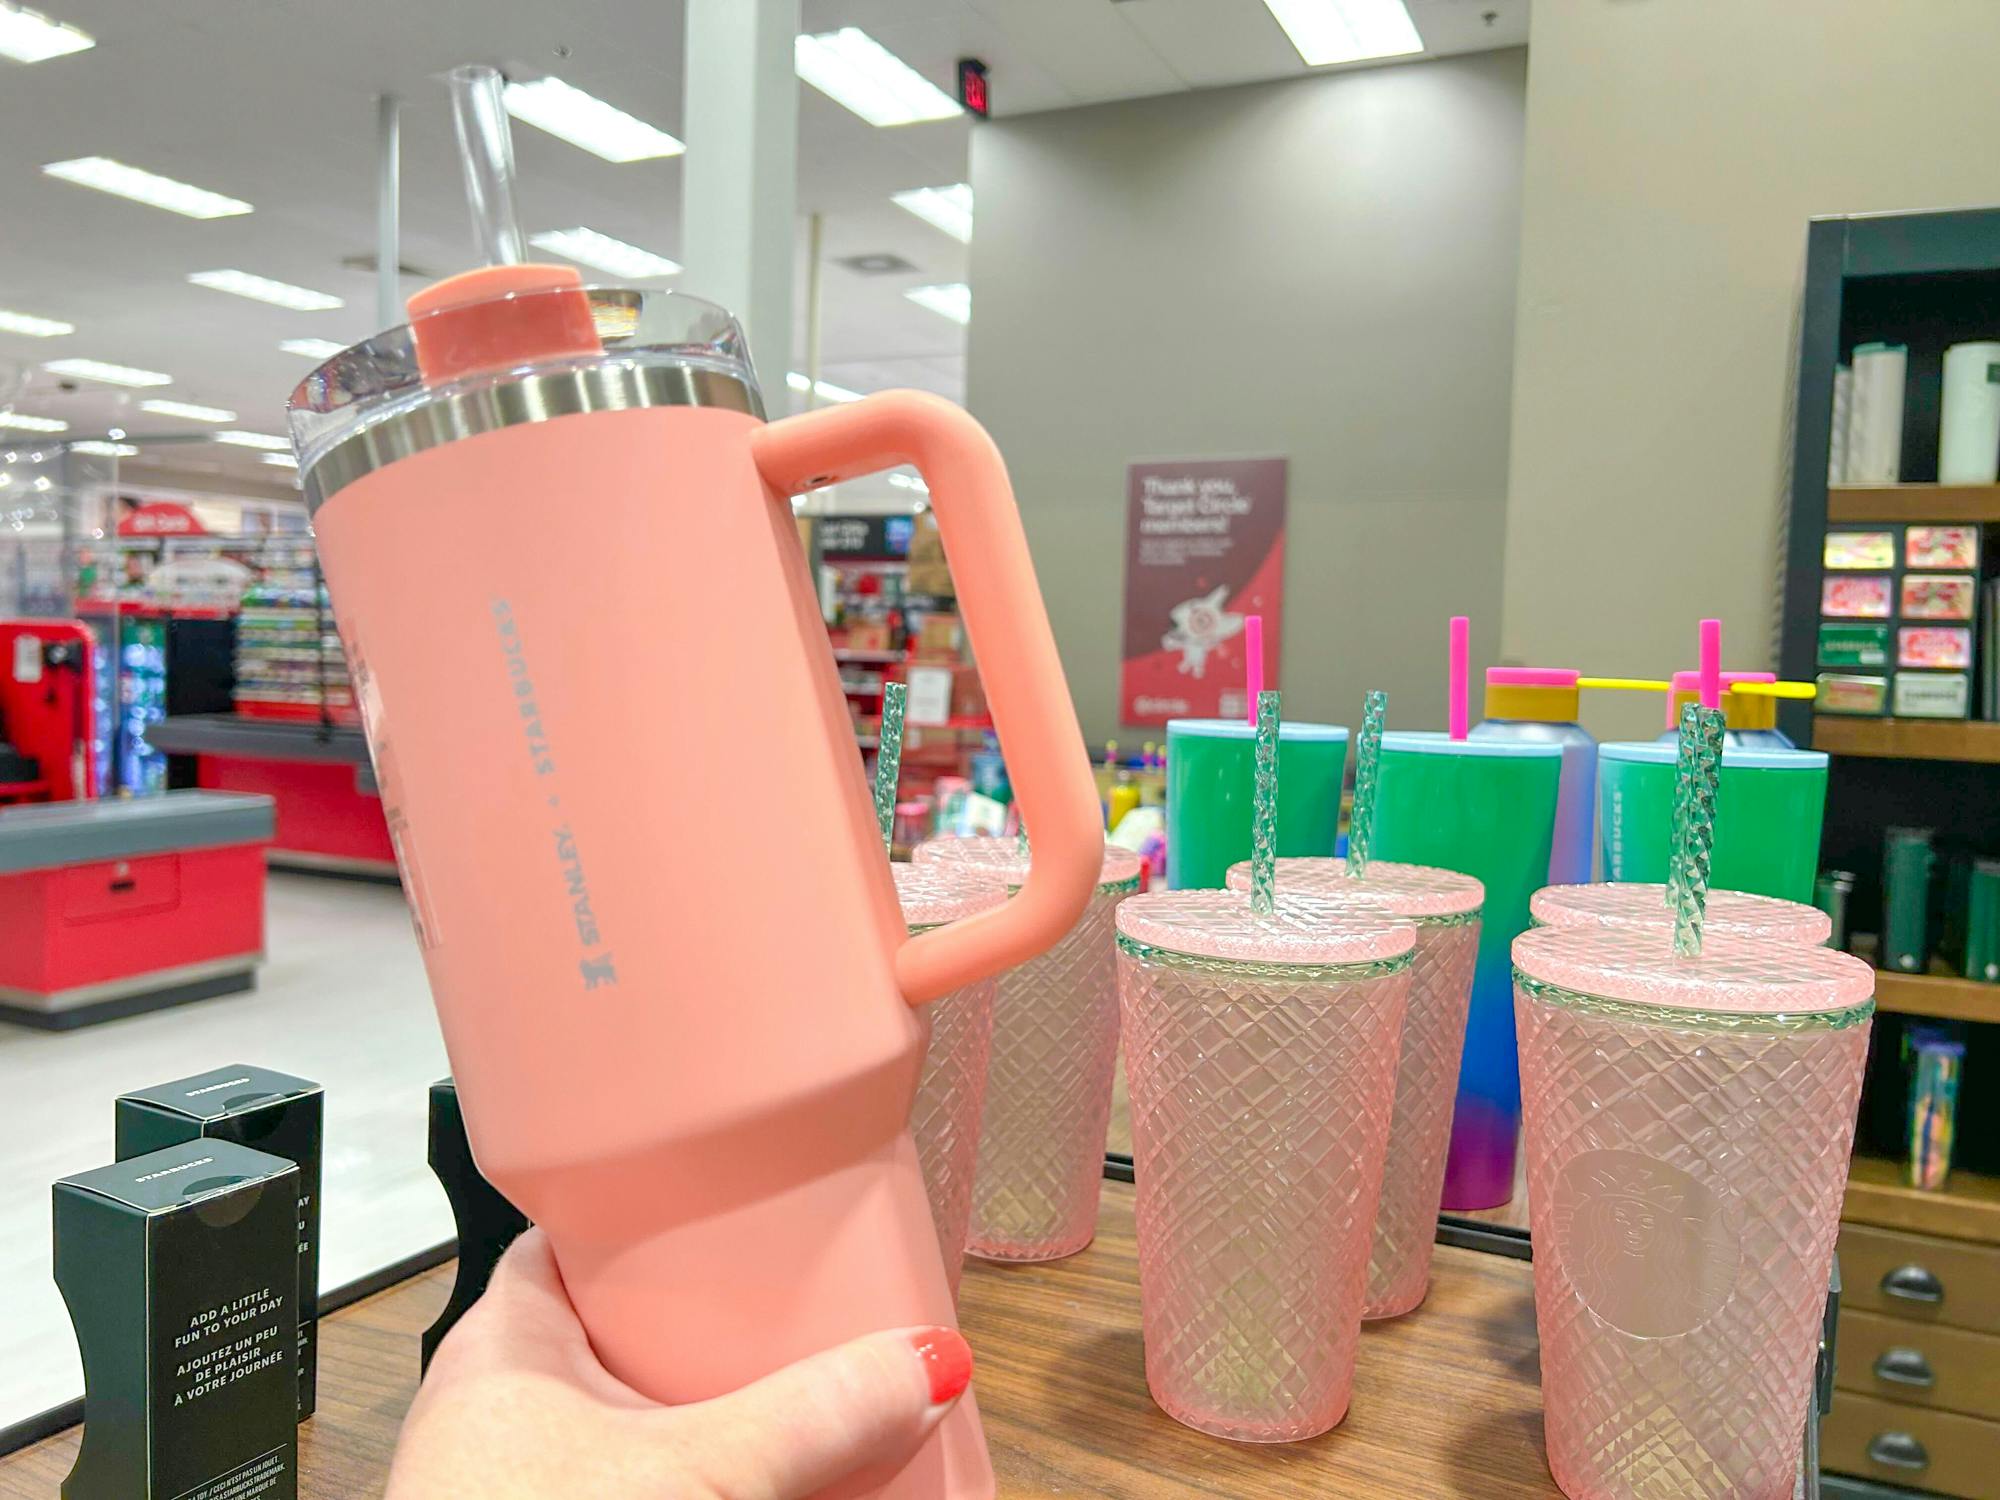 Can you get the Starbucks Stanley cup at Target?